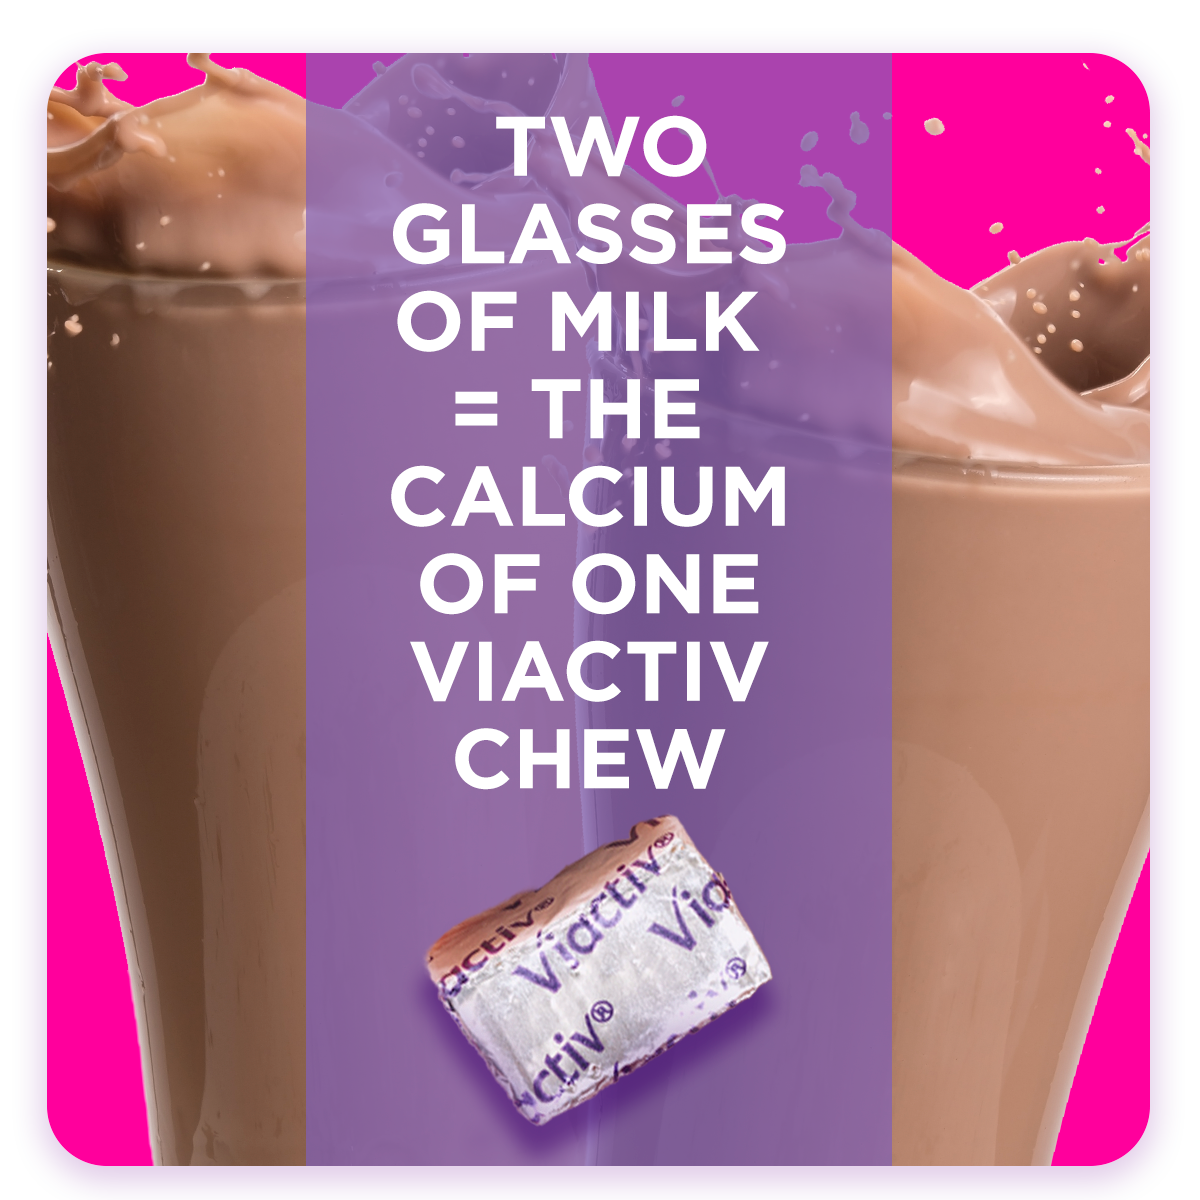 Two Glasses of Milk Equals the Calcium of One Viactiv Chew